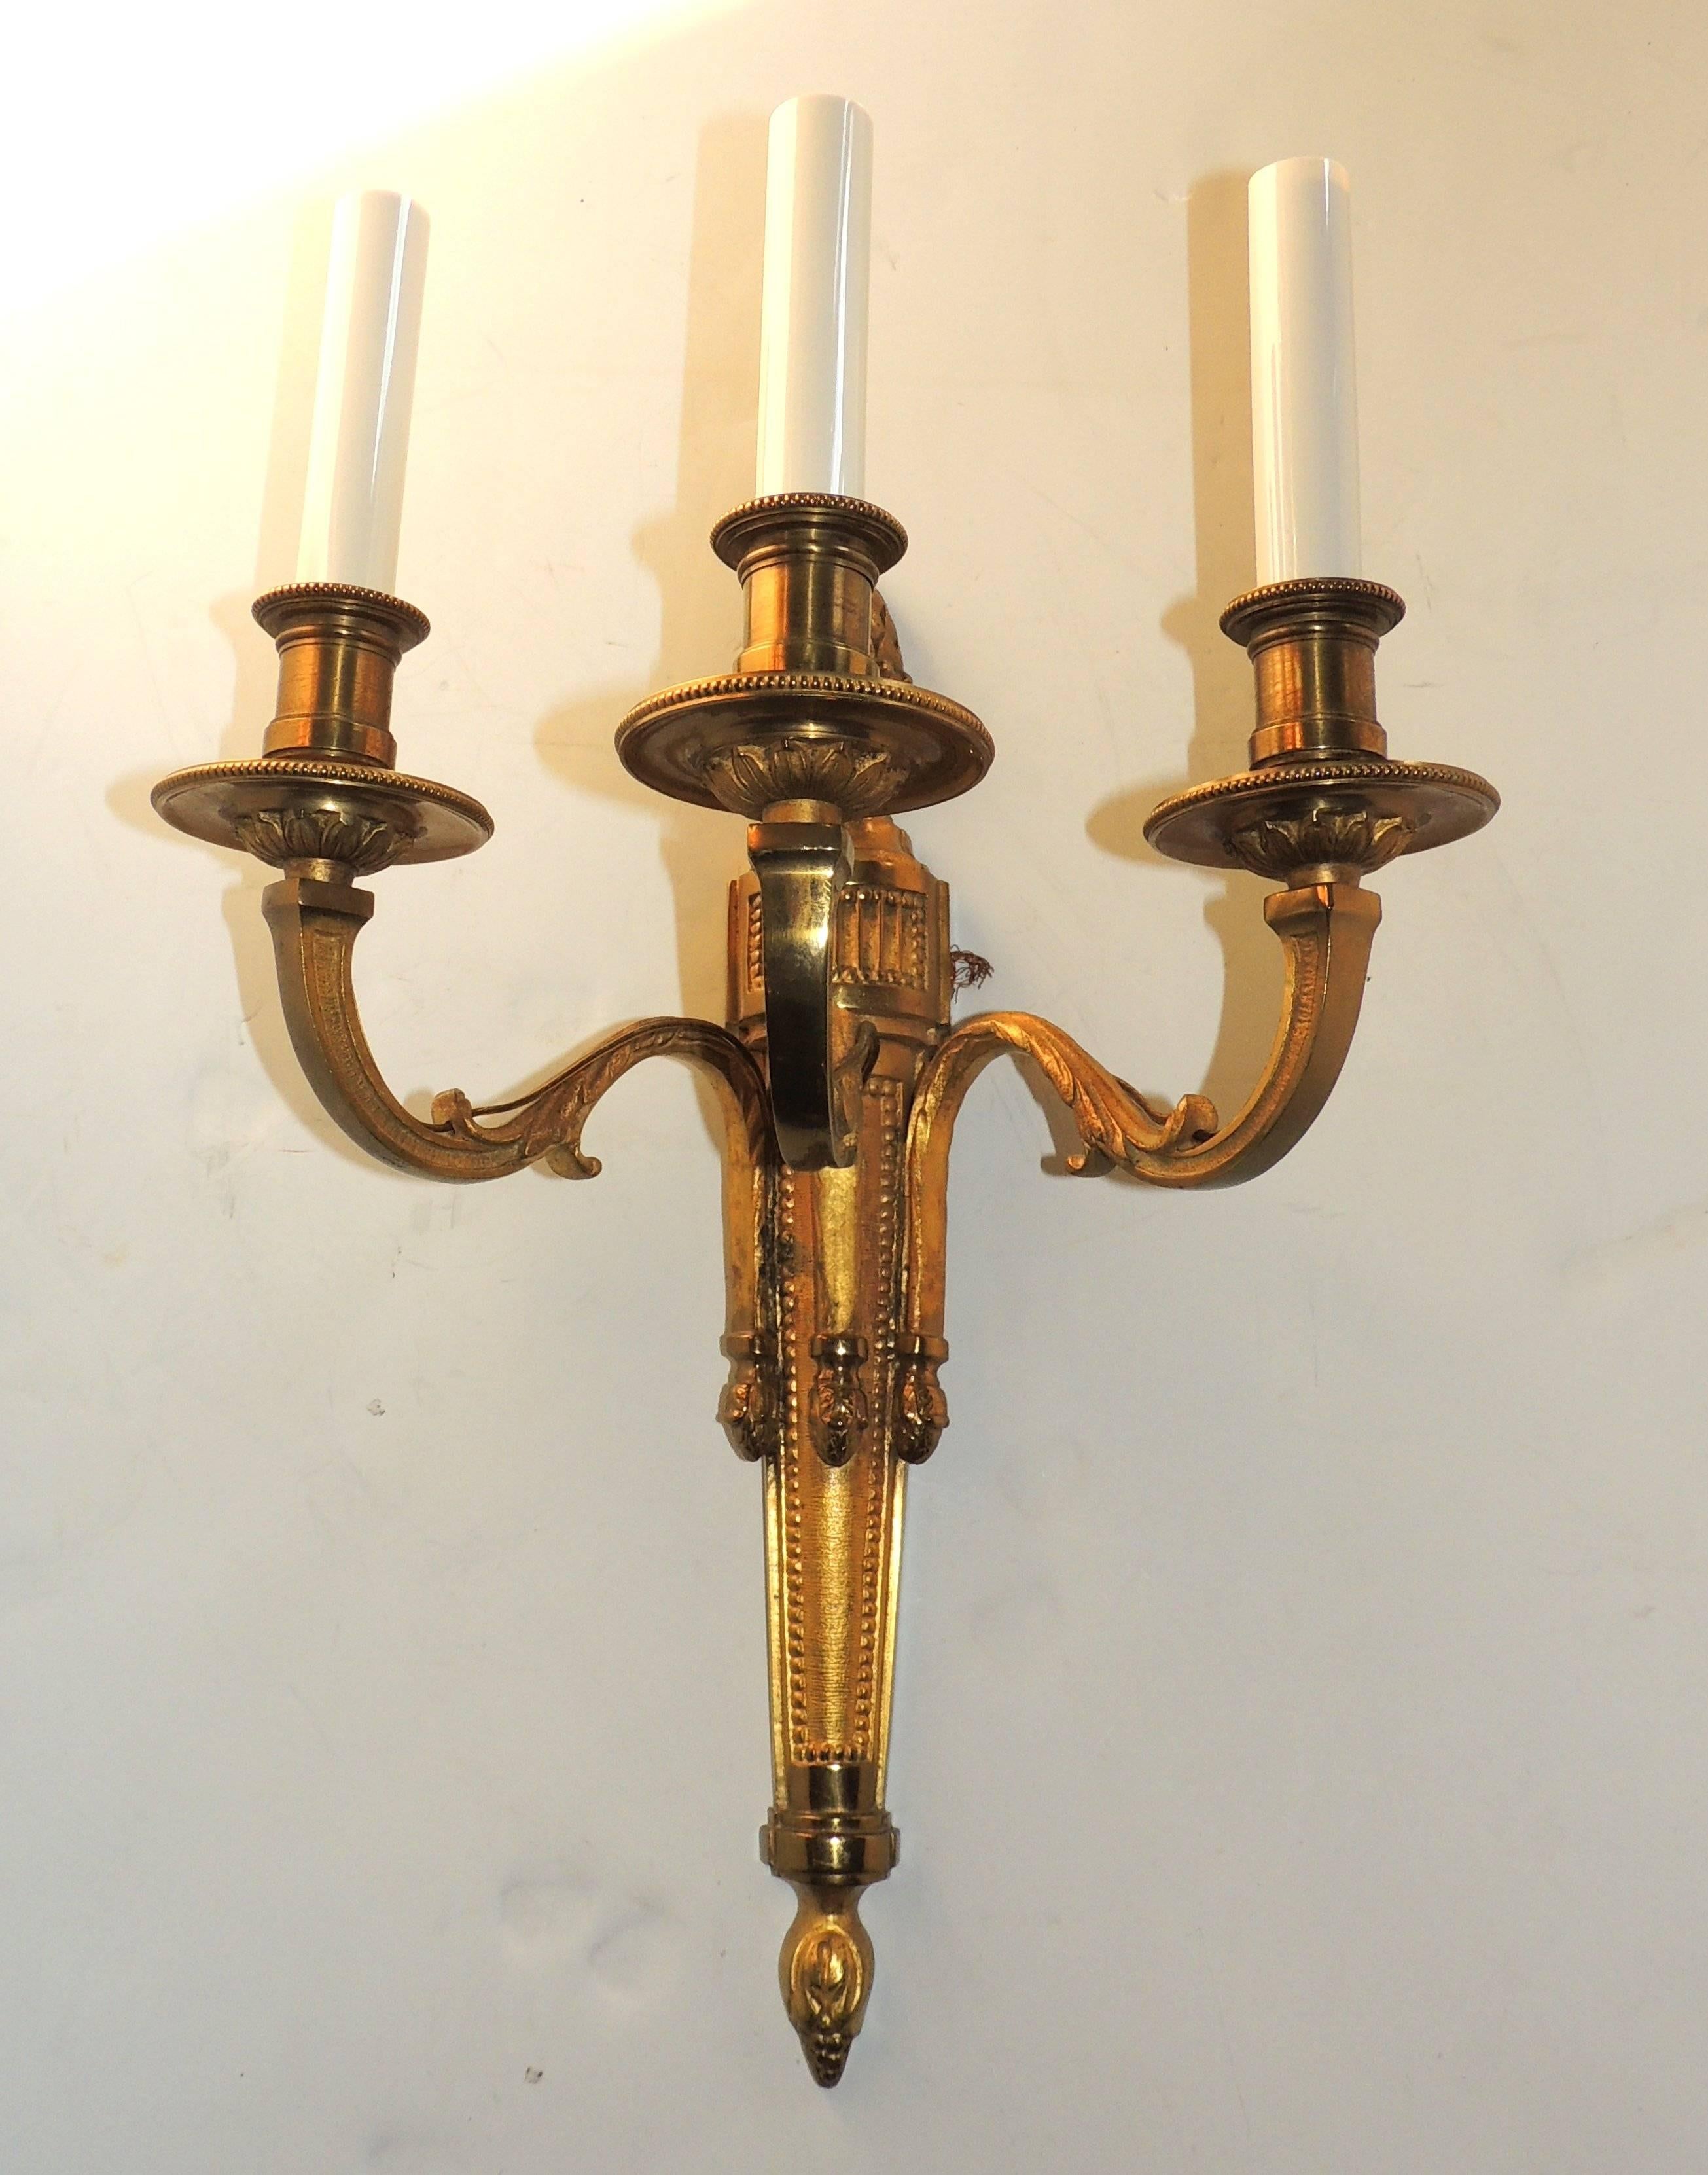 Wonderful Pair Neoclassical Urn Three-Arm Regency Caldwell Empire Sconces In Good Condition For Sale In Roslyn, NY